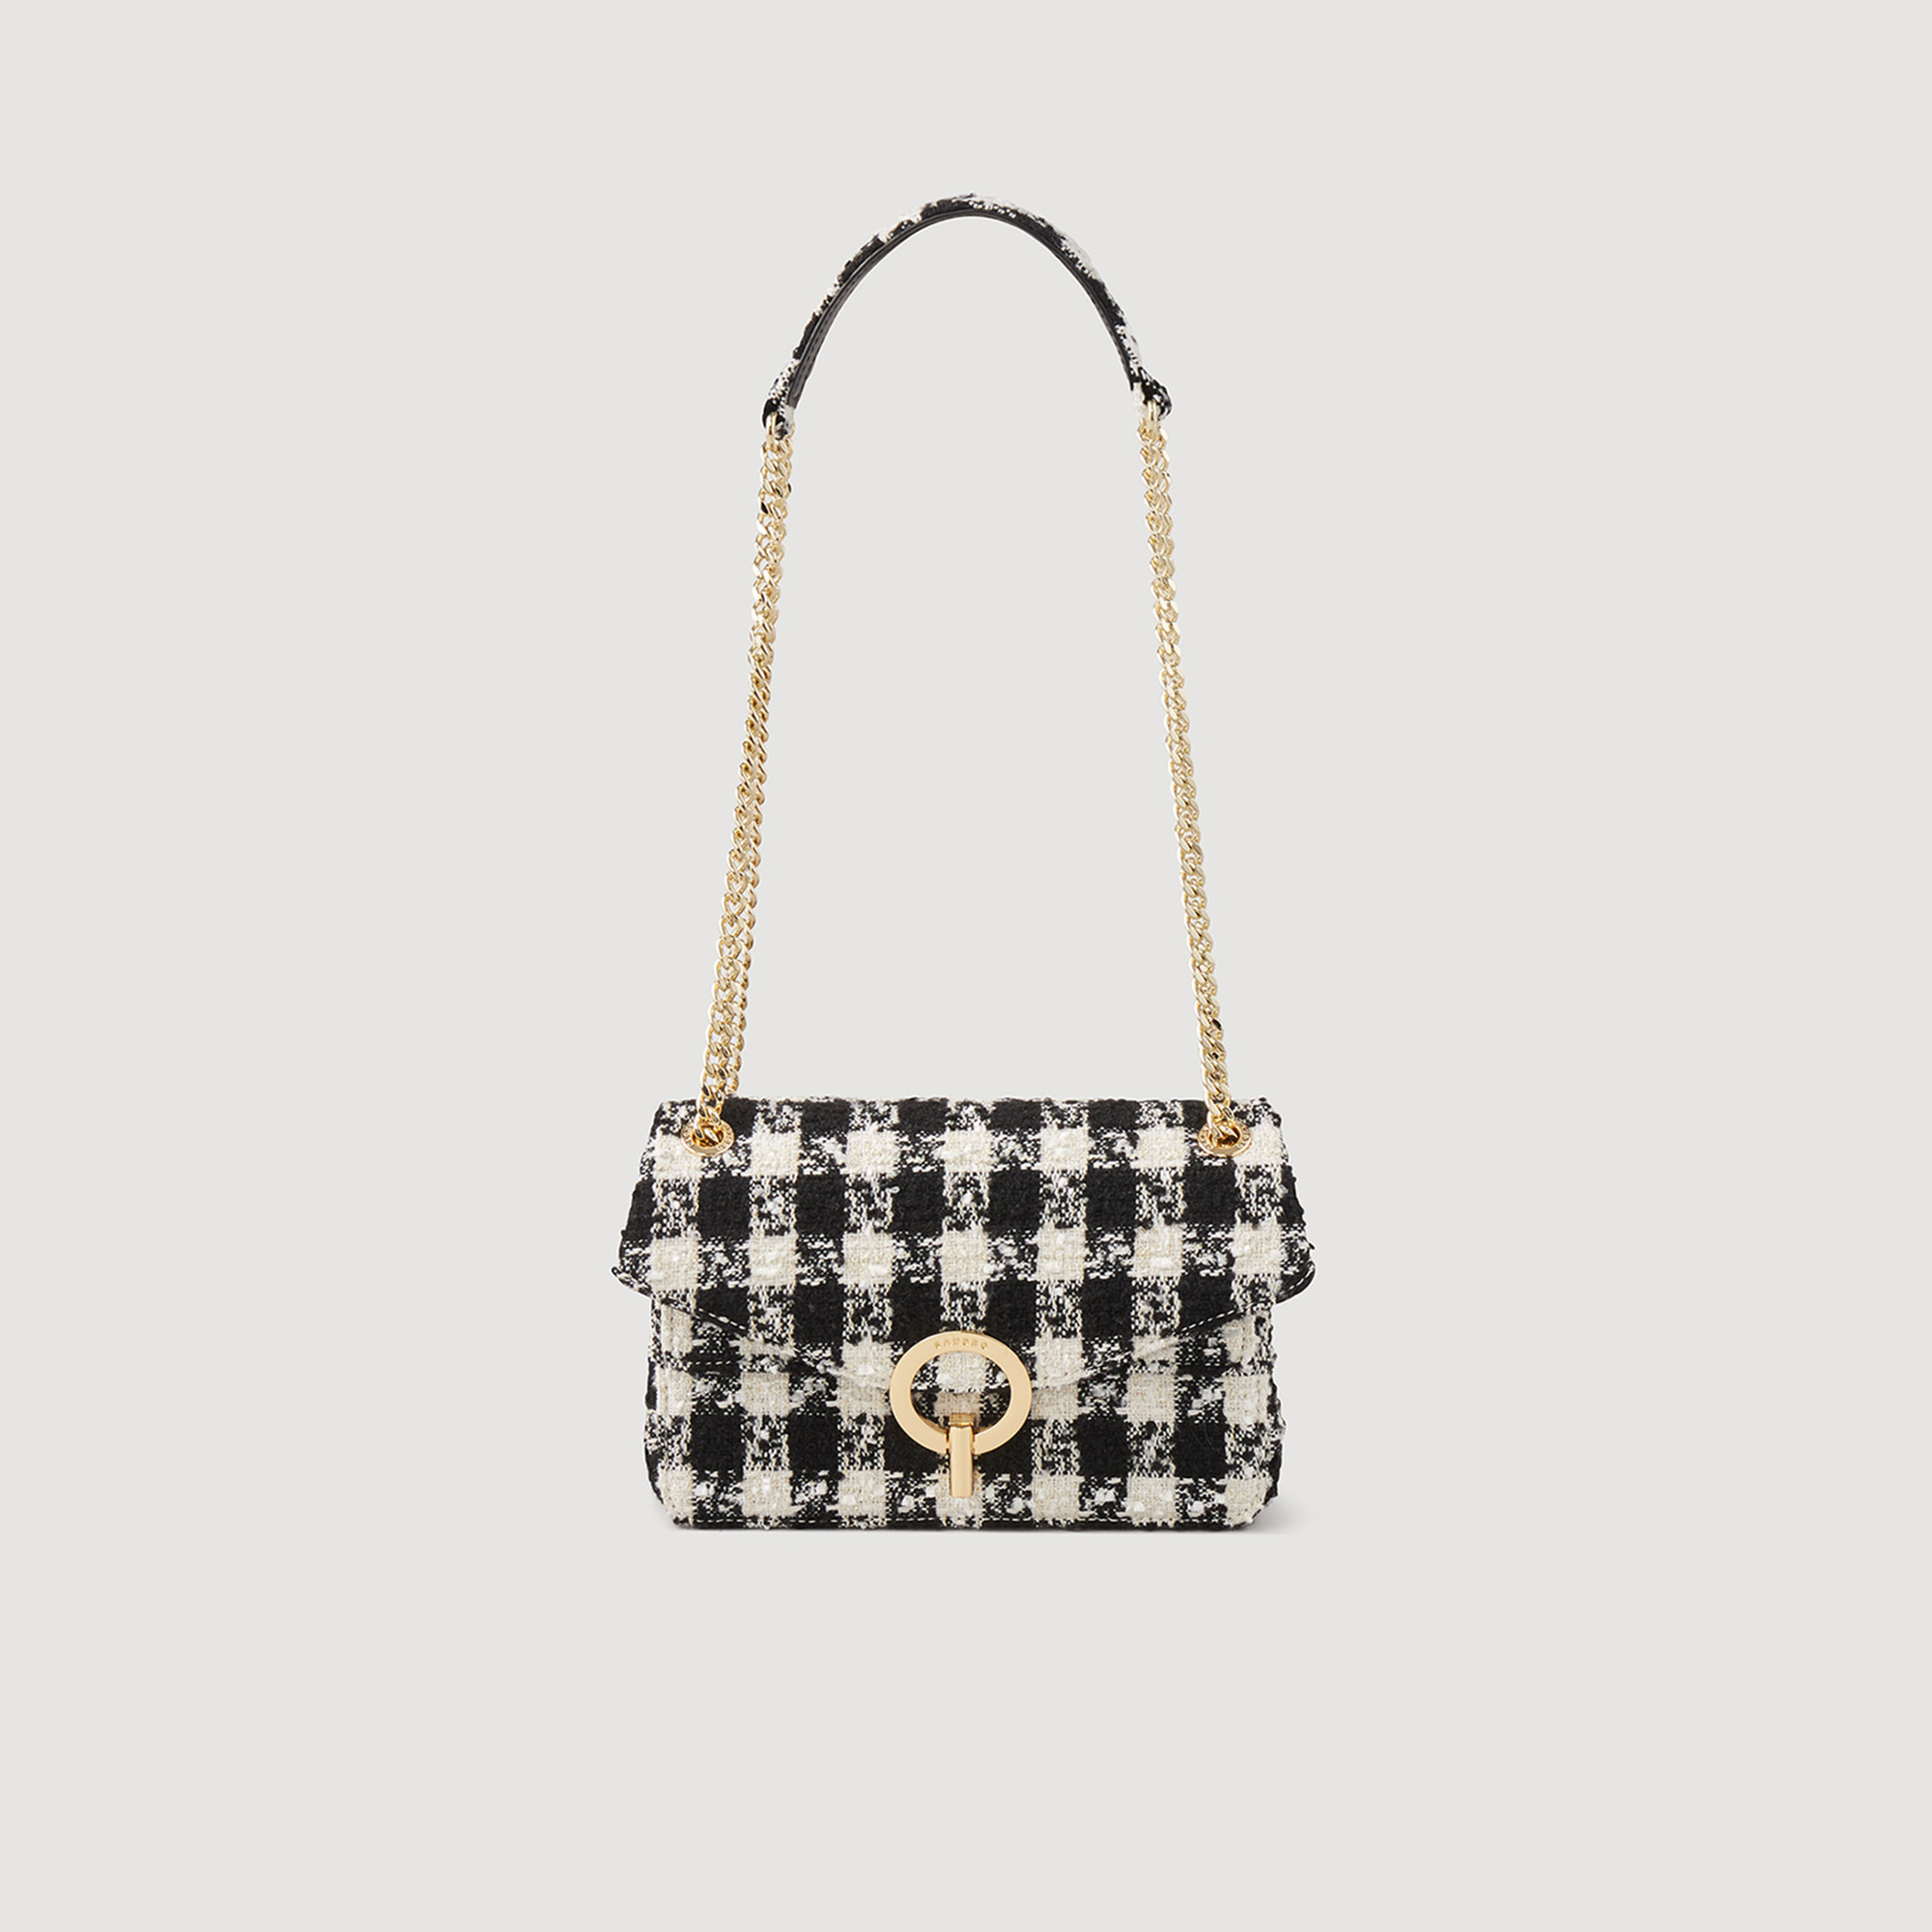 Sandro polyester Yza bag in houndstooth tweed